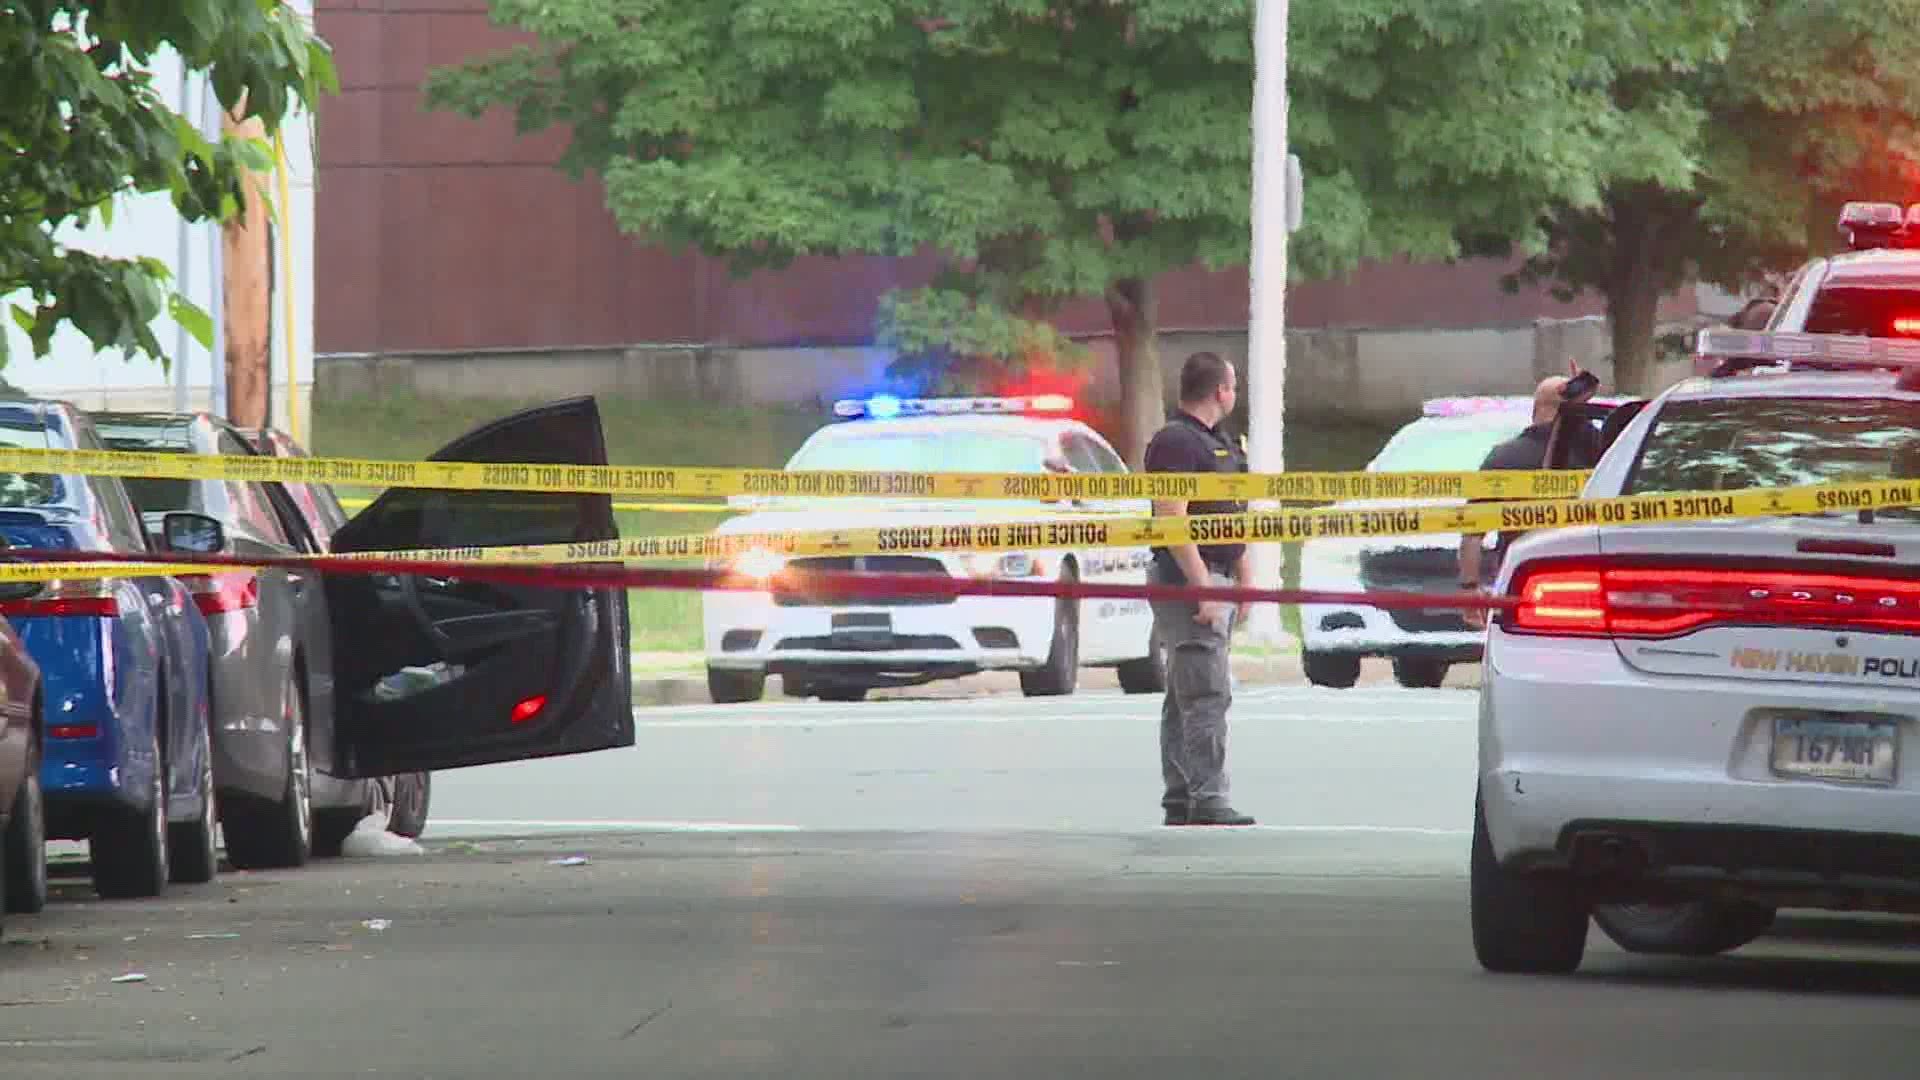 Police are investigating three more shootings in New Haven, after a violent weekend